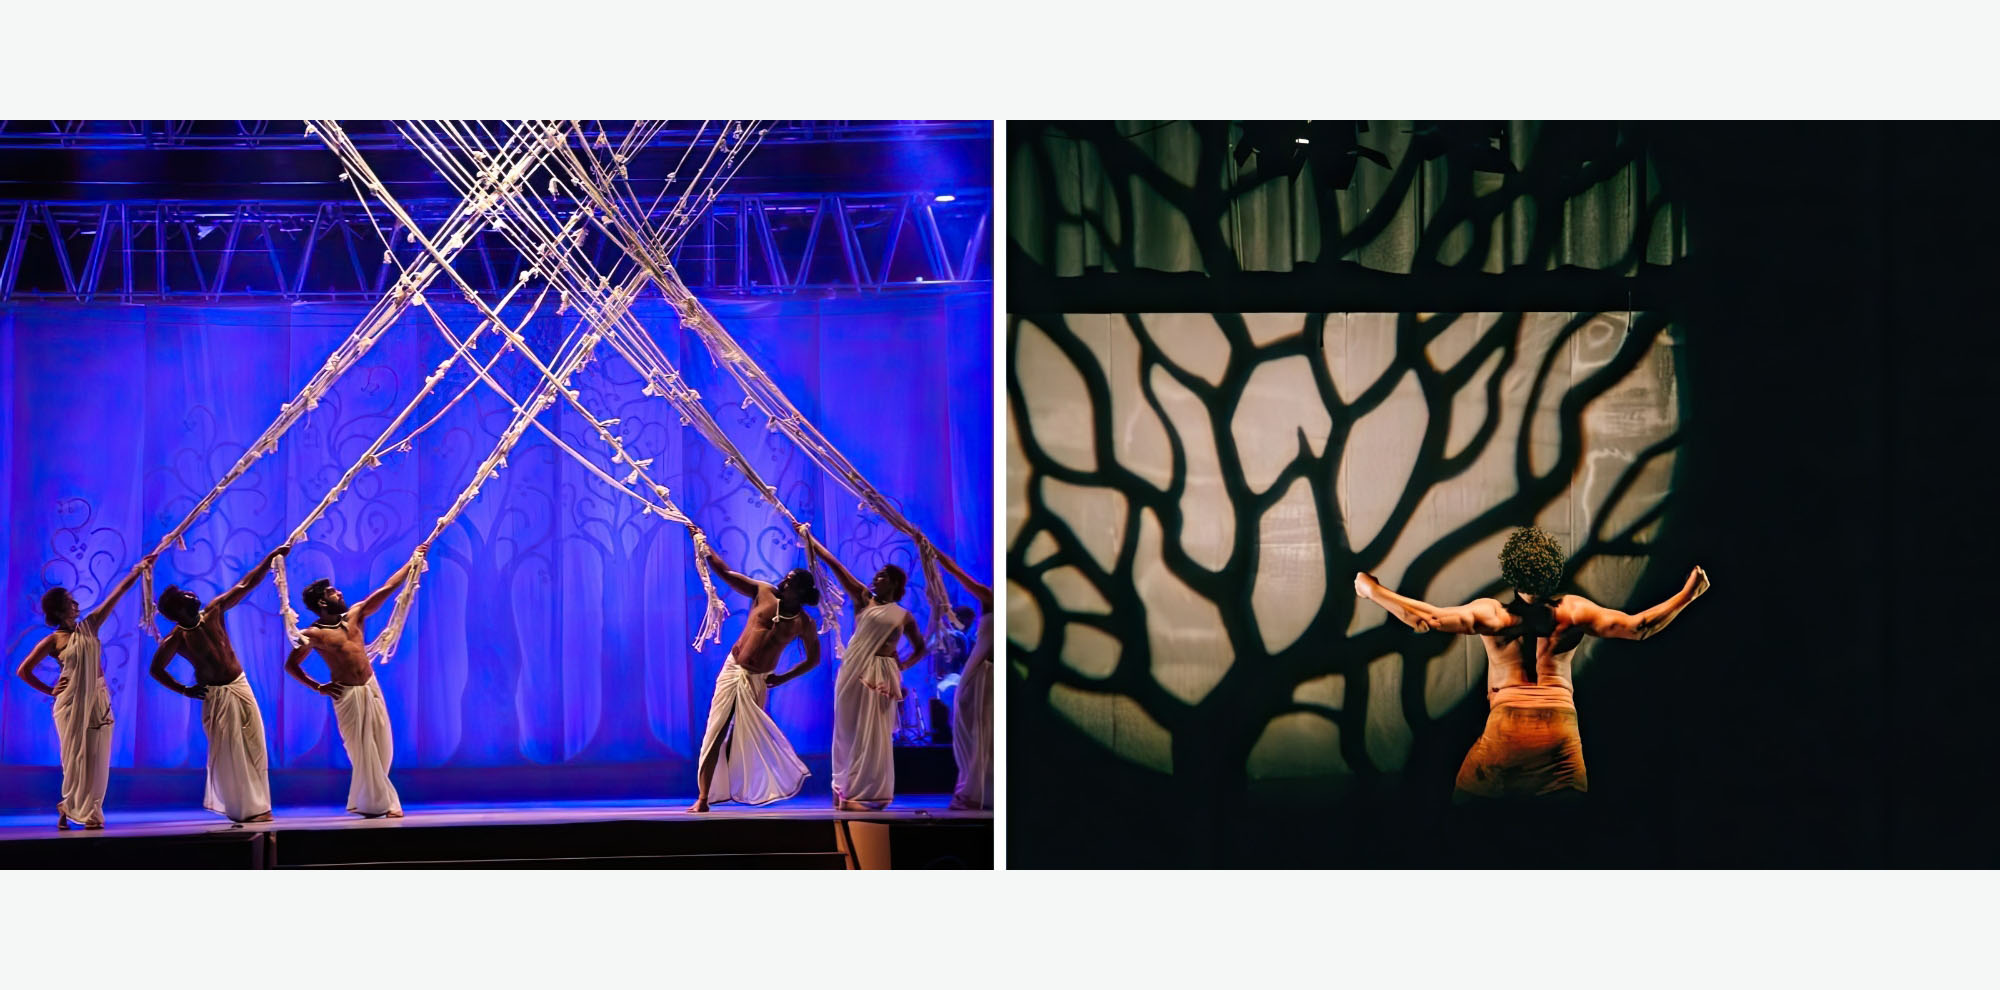 In this collage, the left photograph shows a group of men pulling threads from the ceiling of a blue-lit stage. The right photograph shows a man standing with outstretched arms in front of a silhouette projection of a tree.